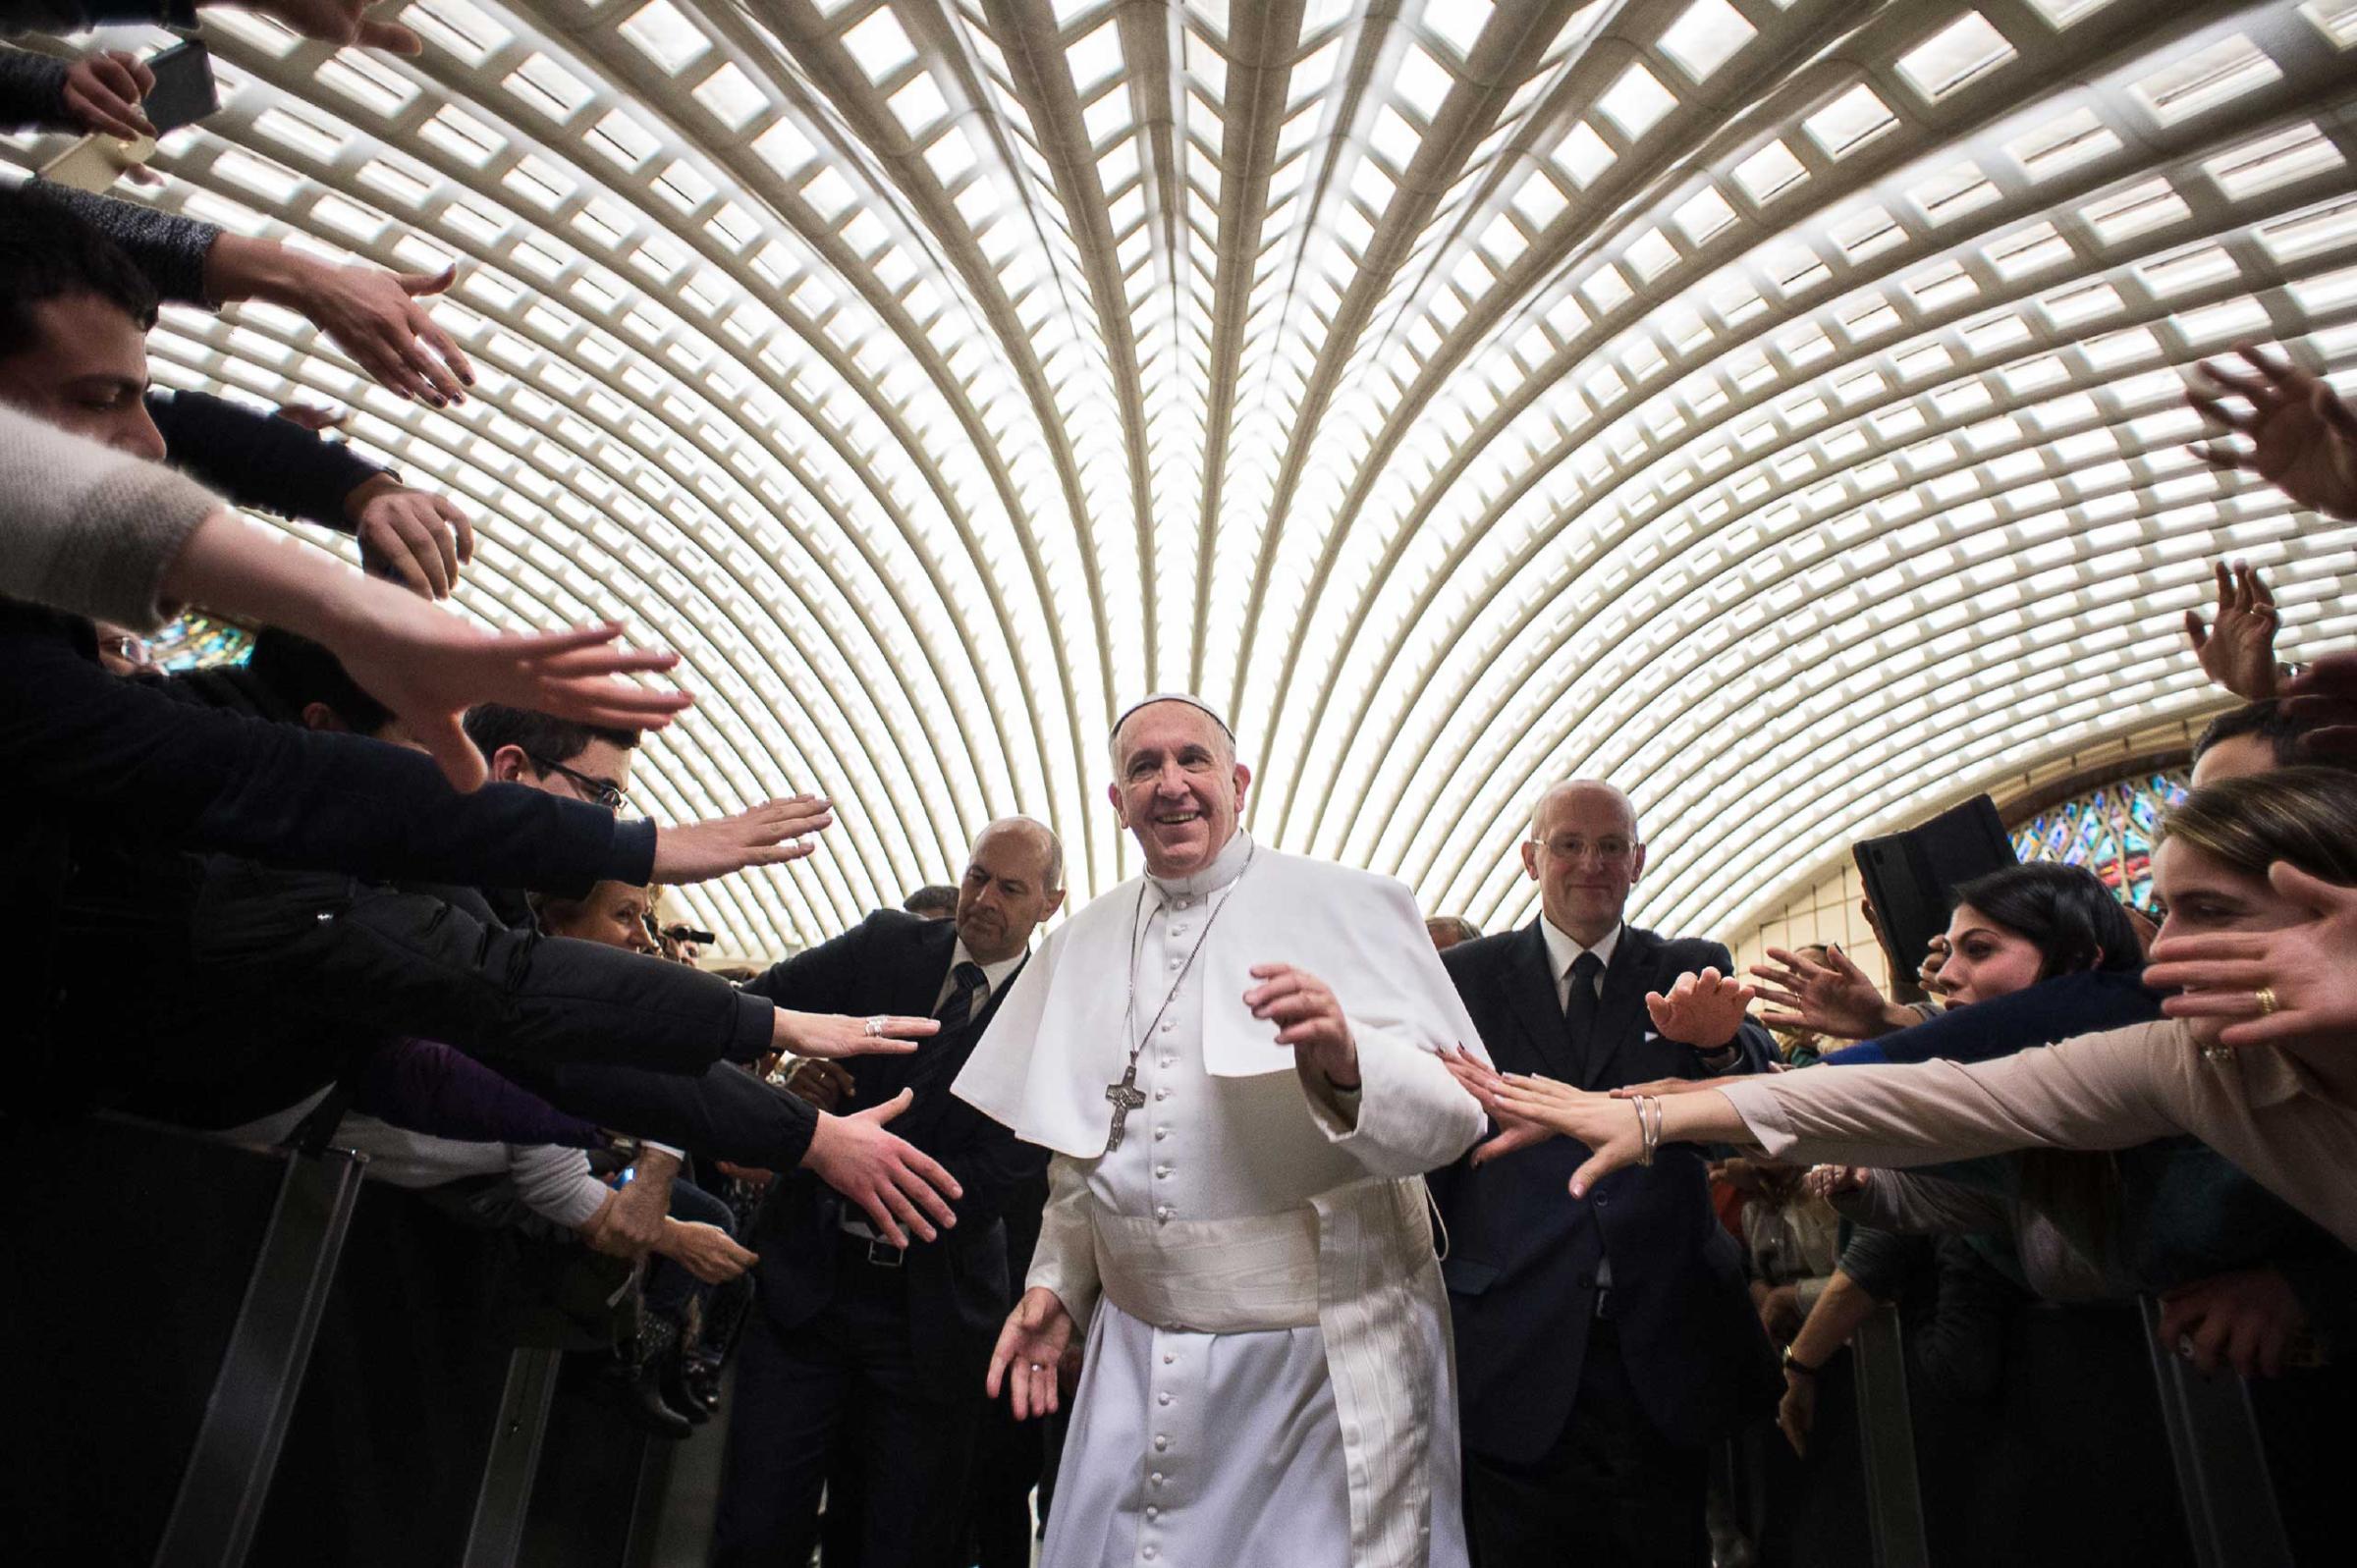 Pope Francis arrives for a special audience with members of the dioceses of Cassano allo Ionio, from southern Italy, at the Vatican. Feb. 21, 2015